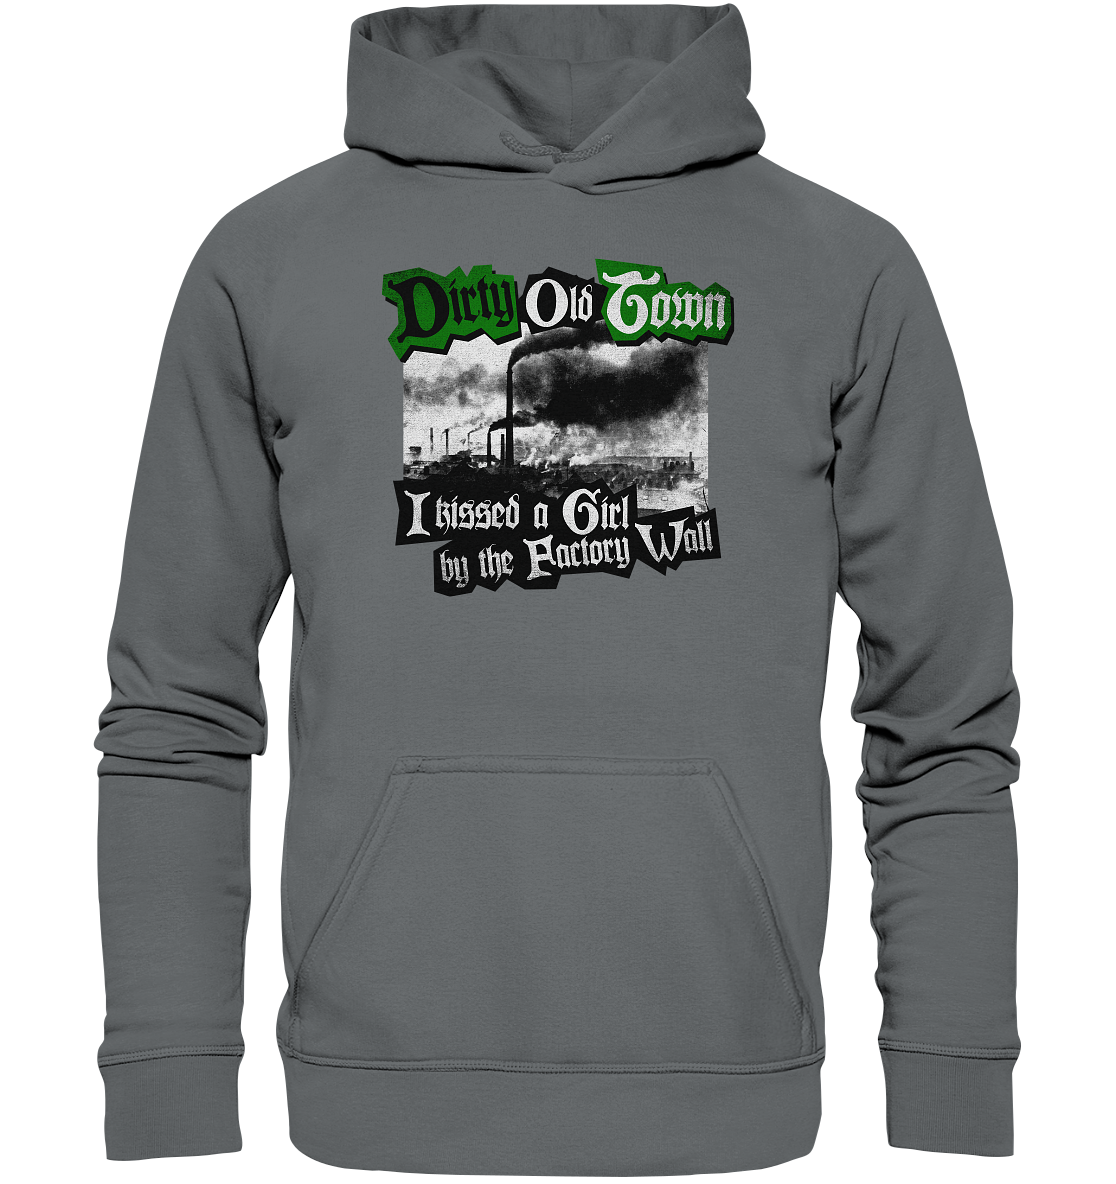 "Dirty Old Town" - Basic Unisex Hoodie